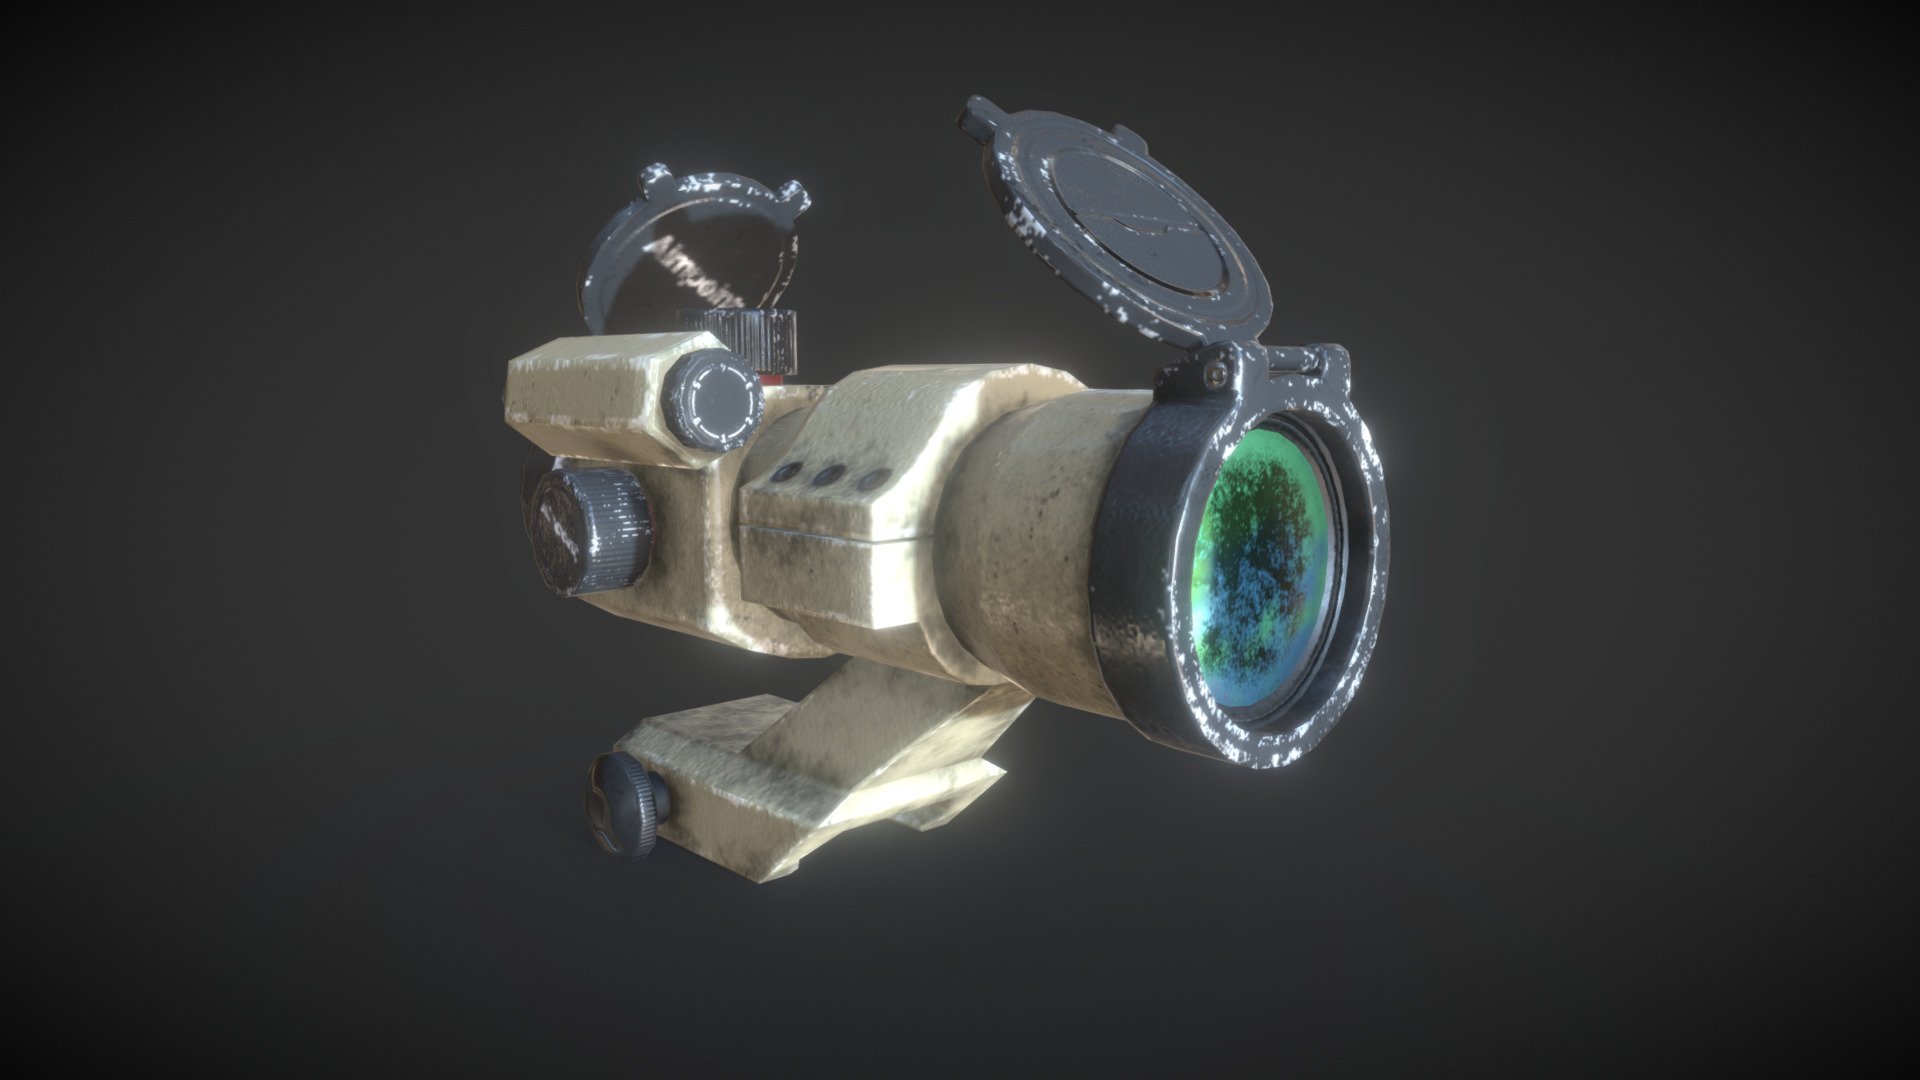 For game model. use 1024 texture for fast performance. modeling in Blender 2.79 and texturing in Substance painter 2.0 - Aim-Point_Red-Dot-Sight - 3D model by Michael Karel (@michaelkarel) 3d model